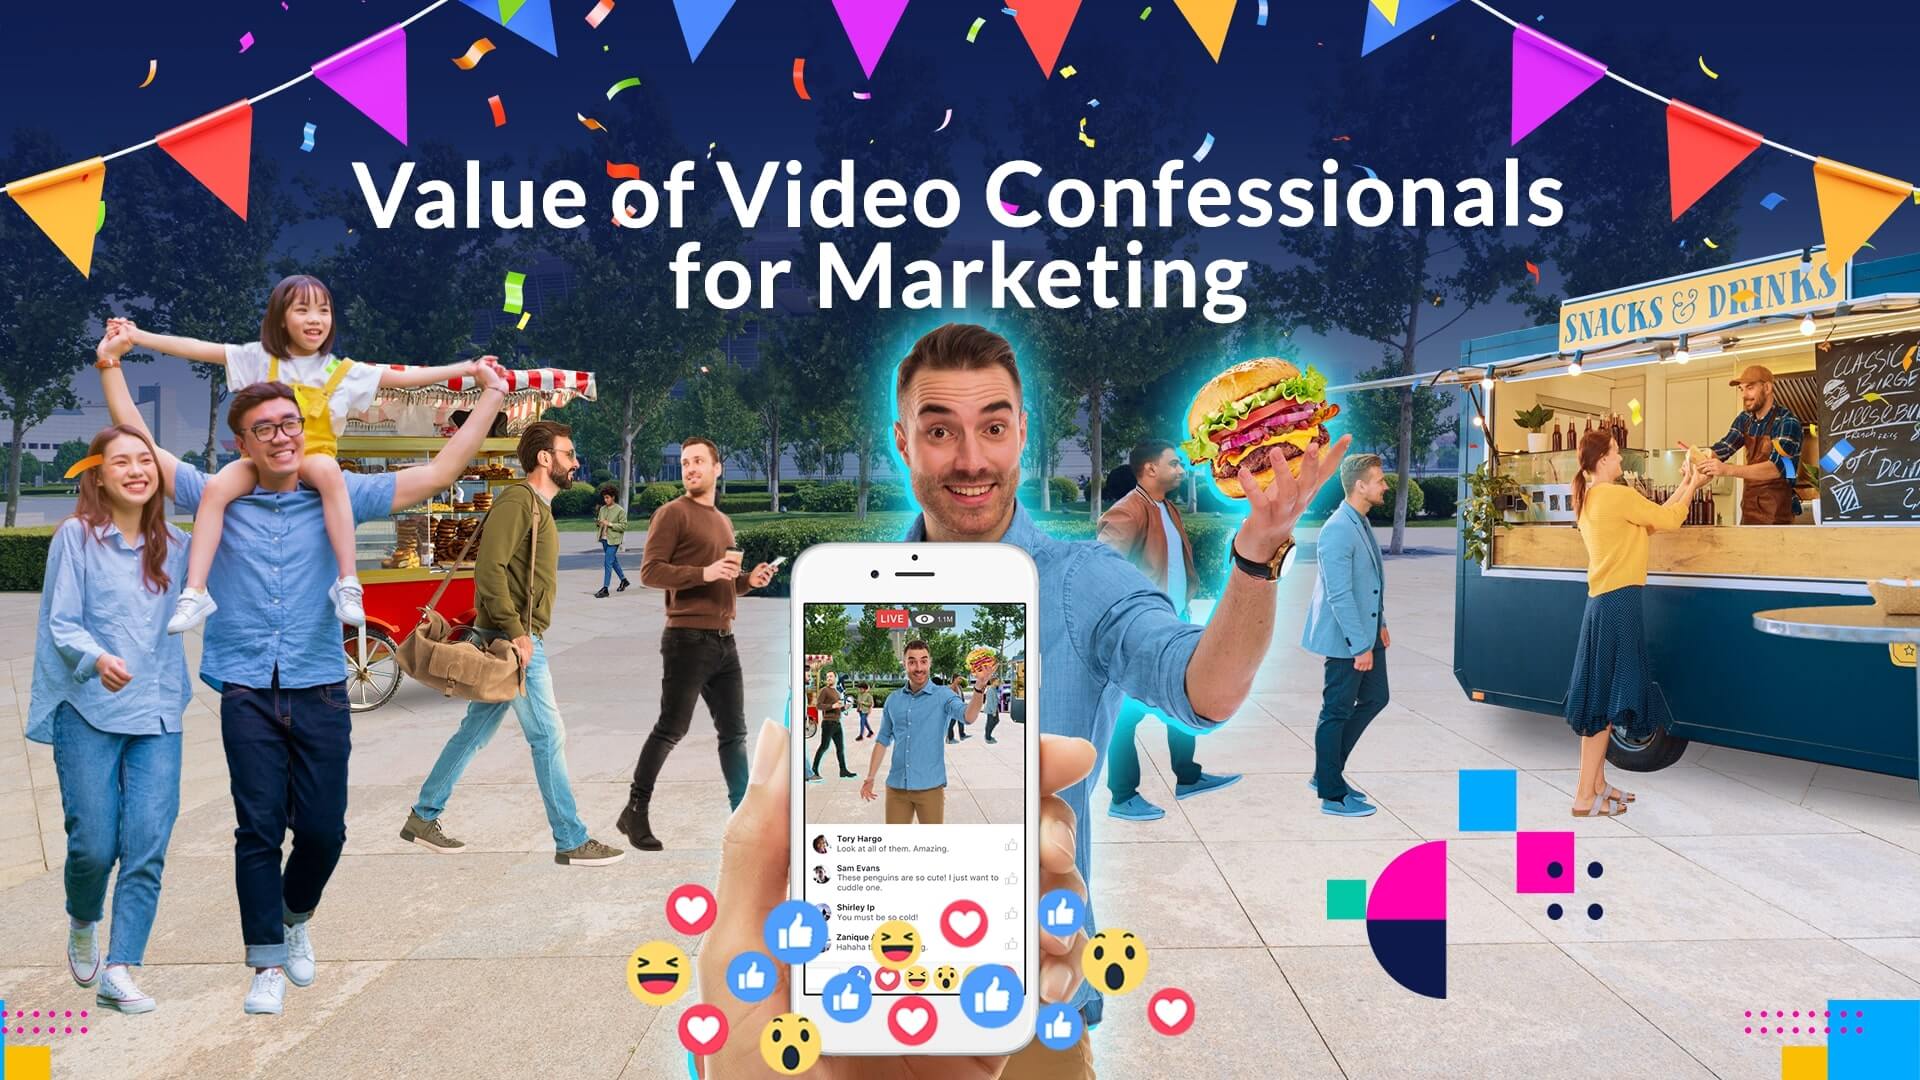 Value of video confessionals for marketing